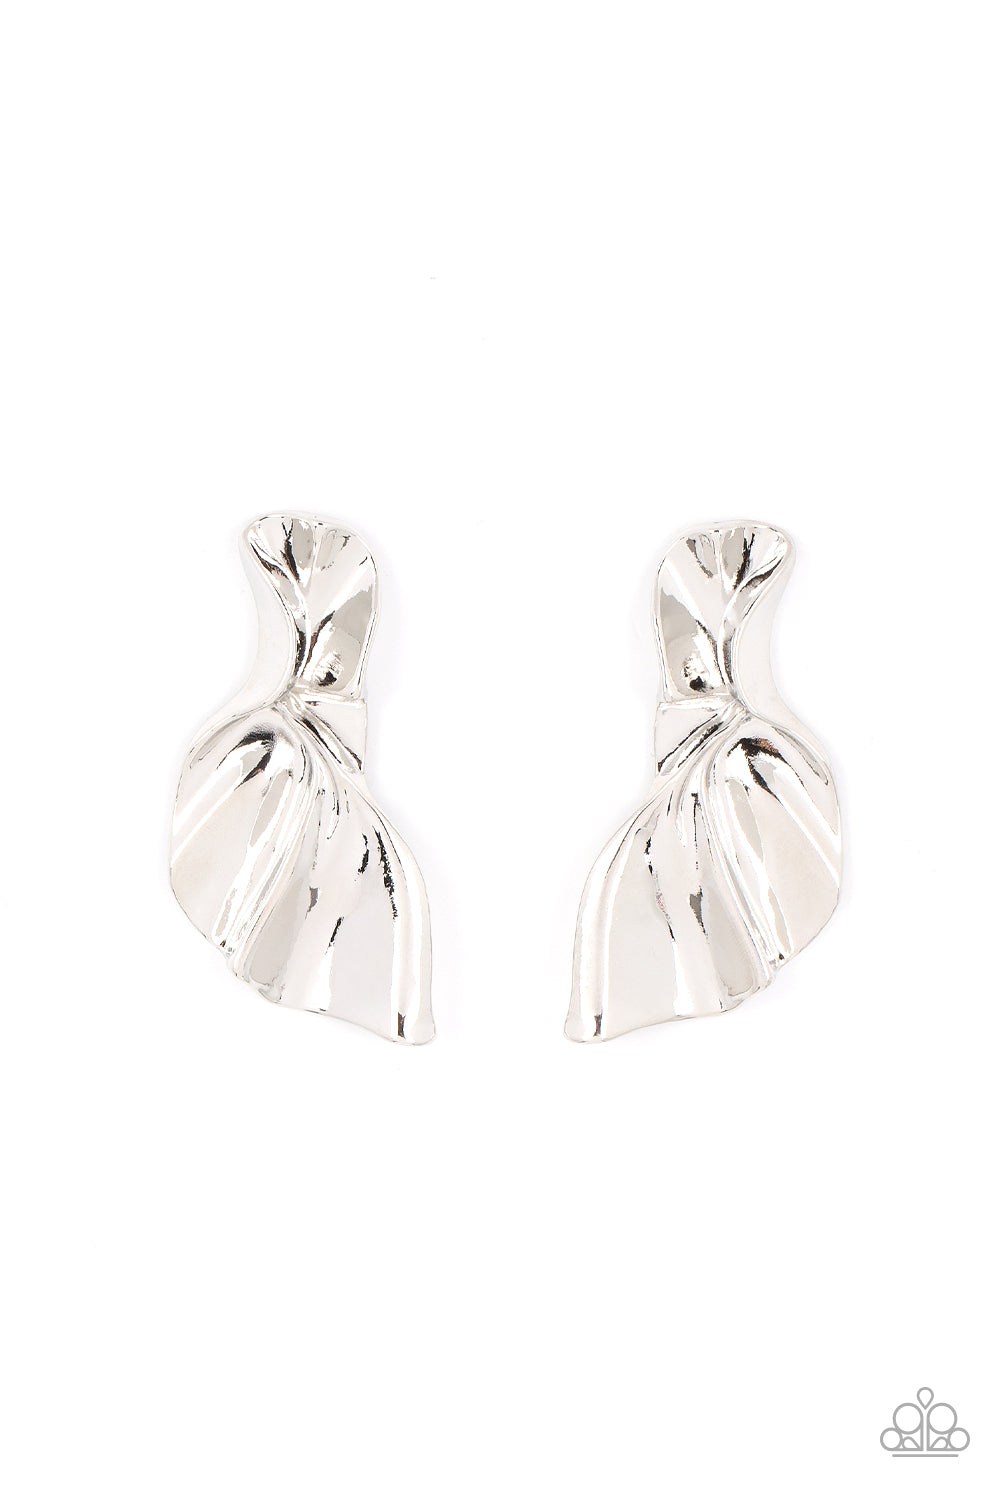 Paparazzi ♥ METAL-Physical Mood - Silver ♥ Post Earrings